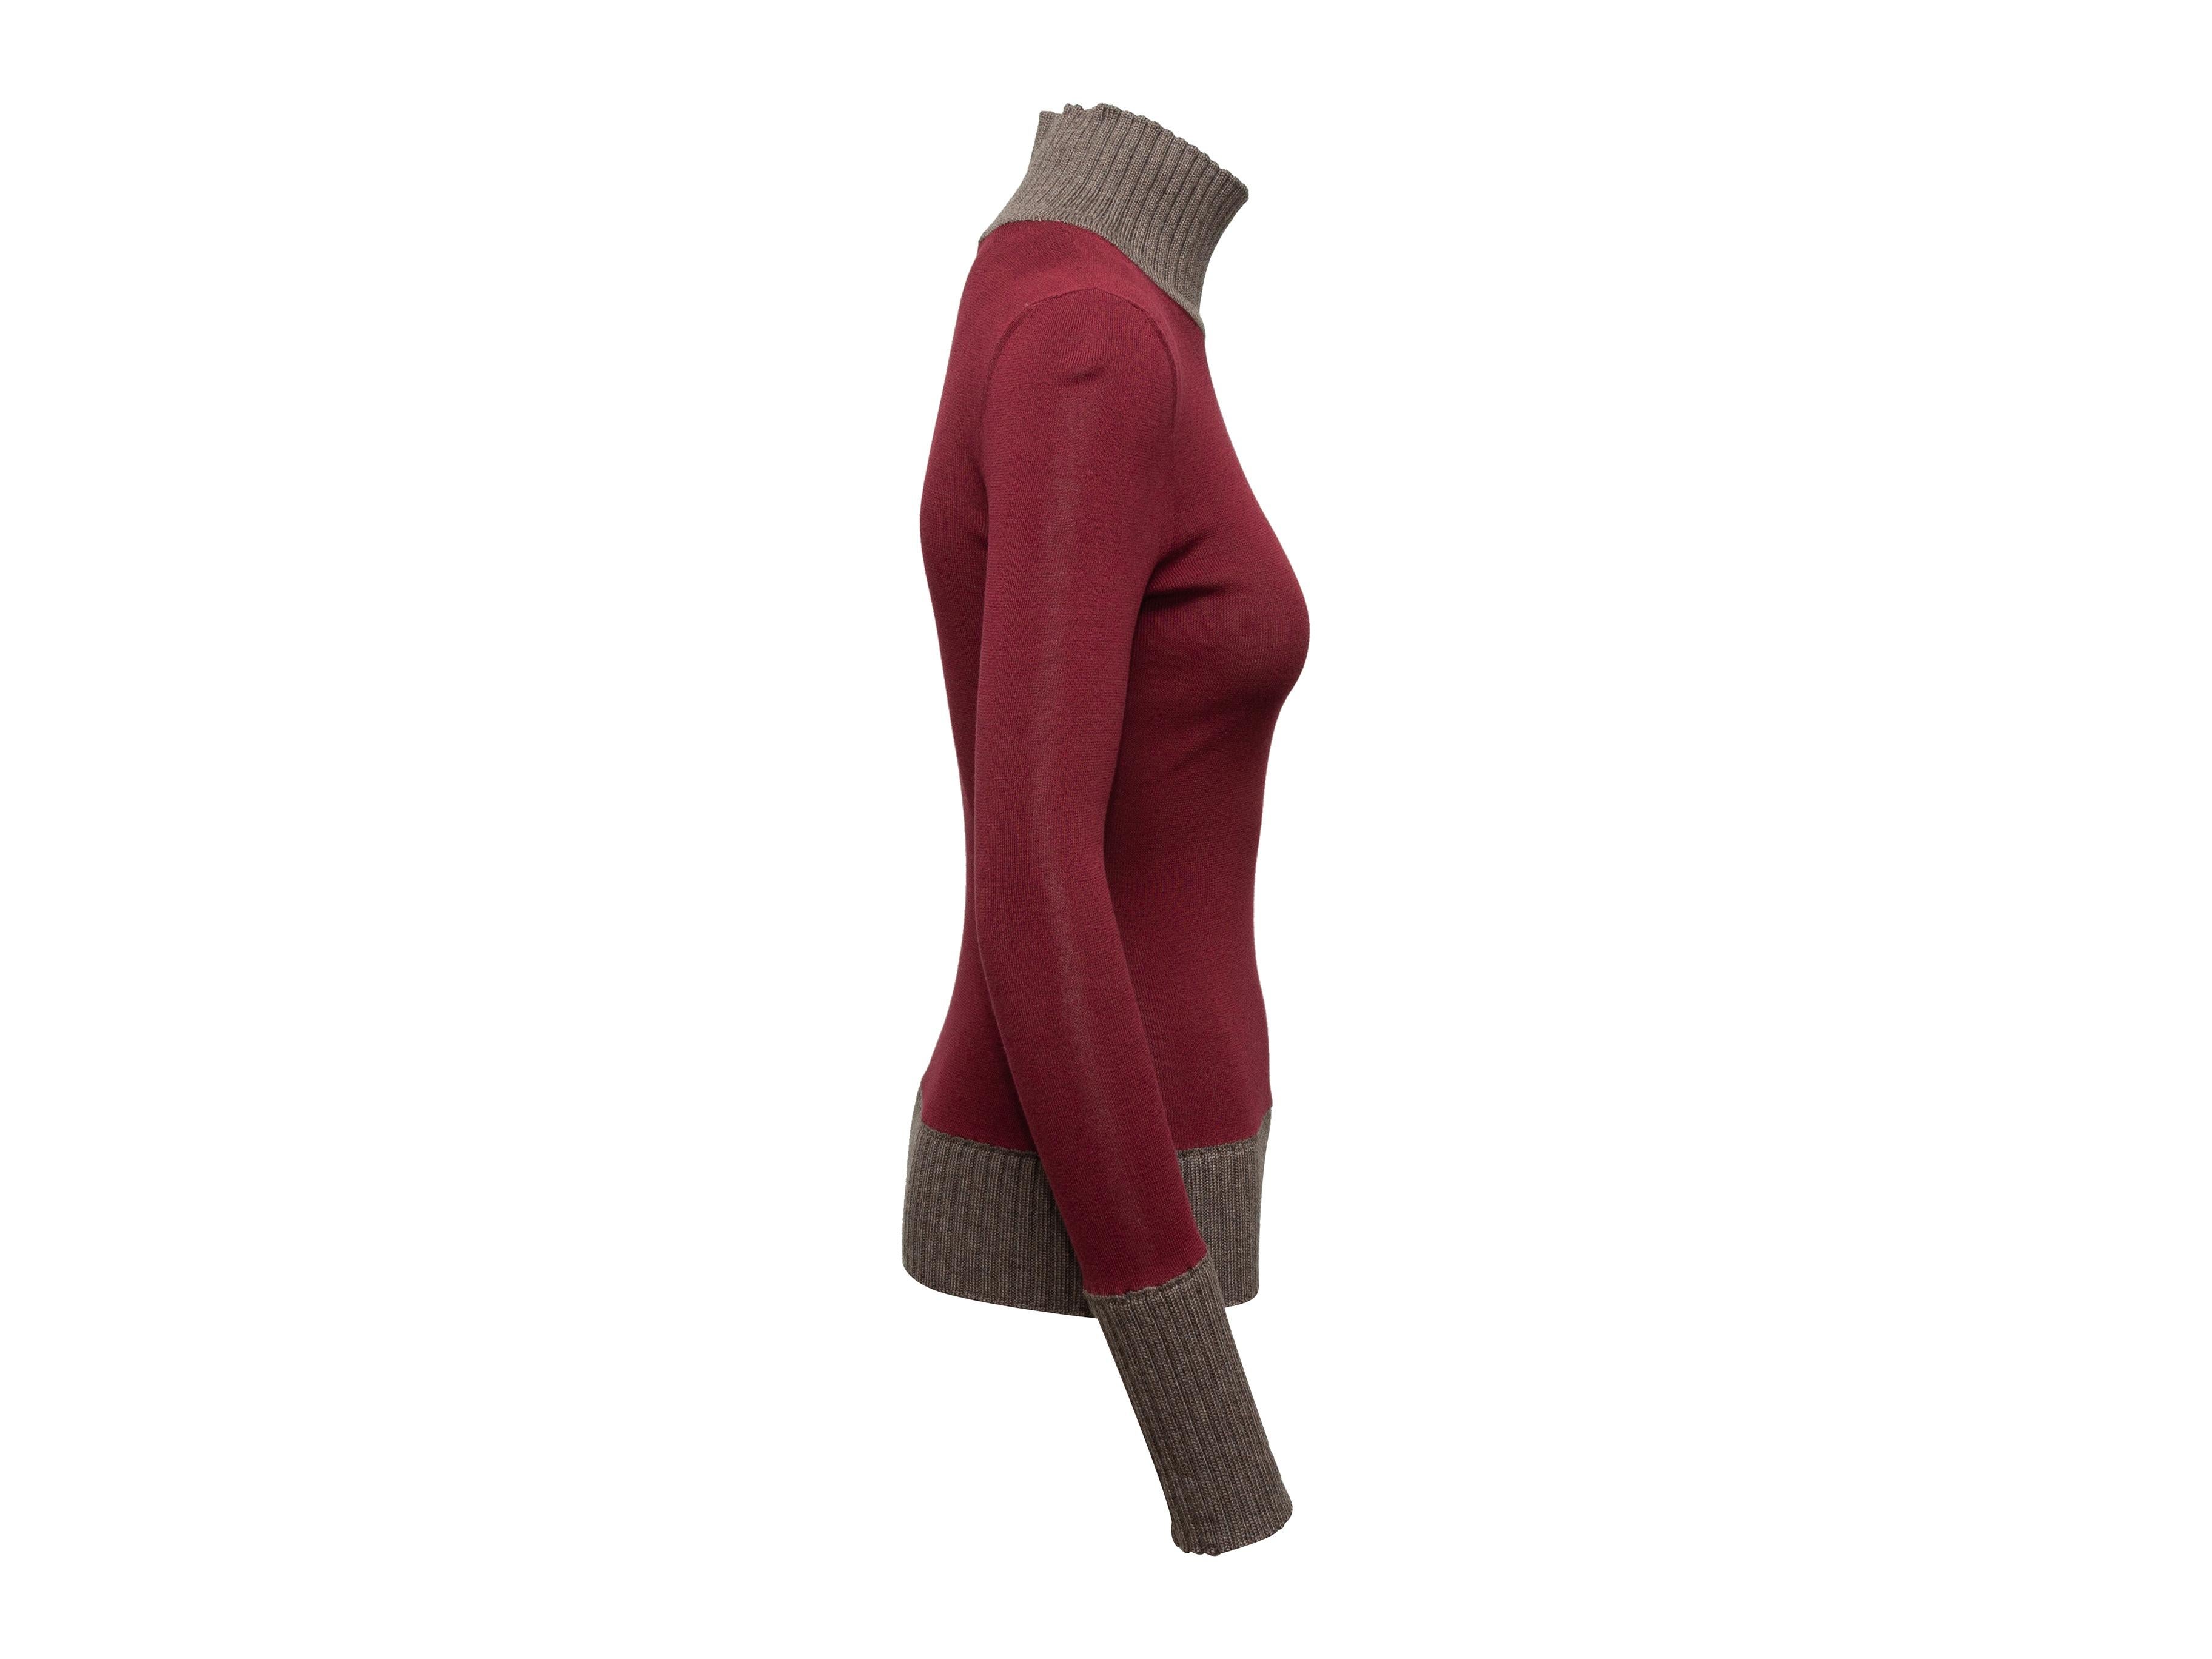 Product details: Burgundy red and brown turtleneck sweater by Victoria Beckham. Rib knit texture throughout. 23